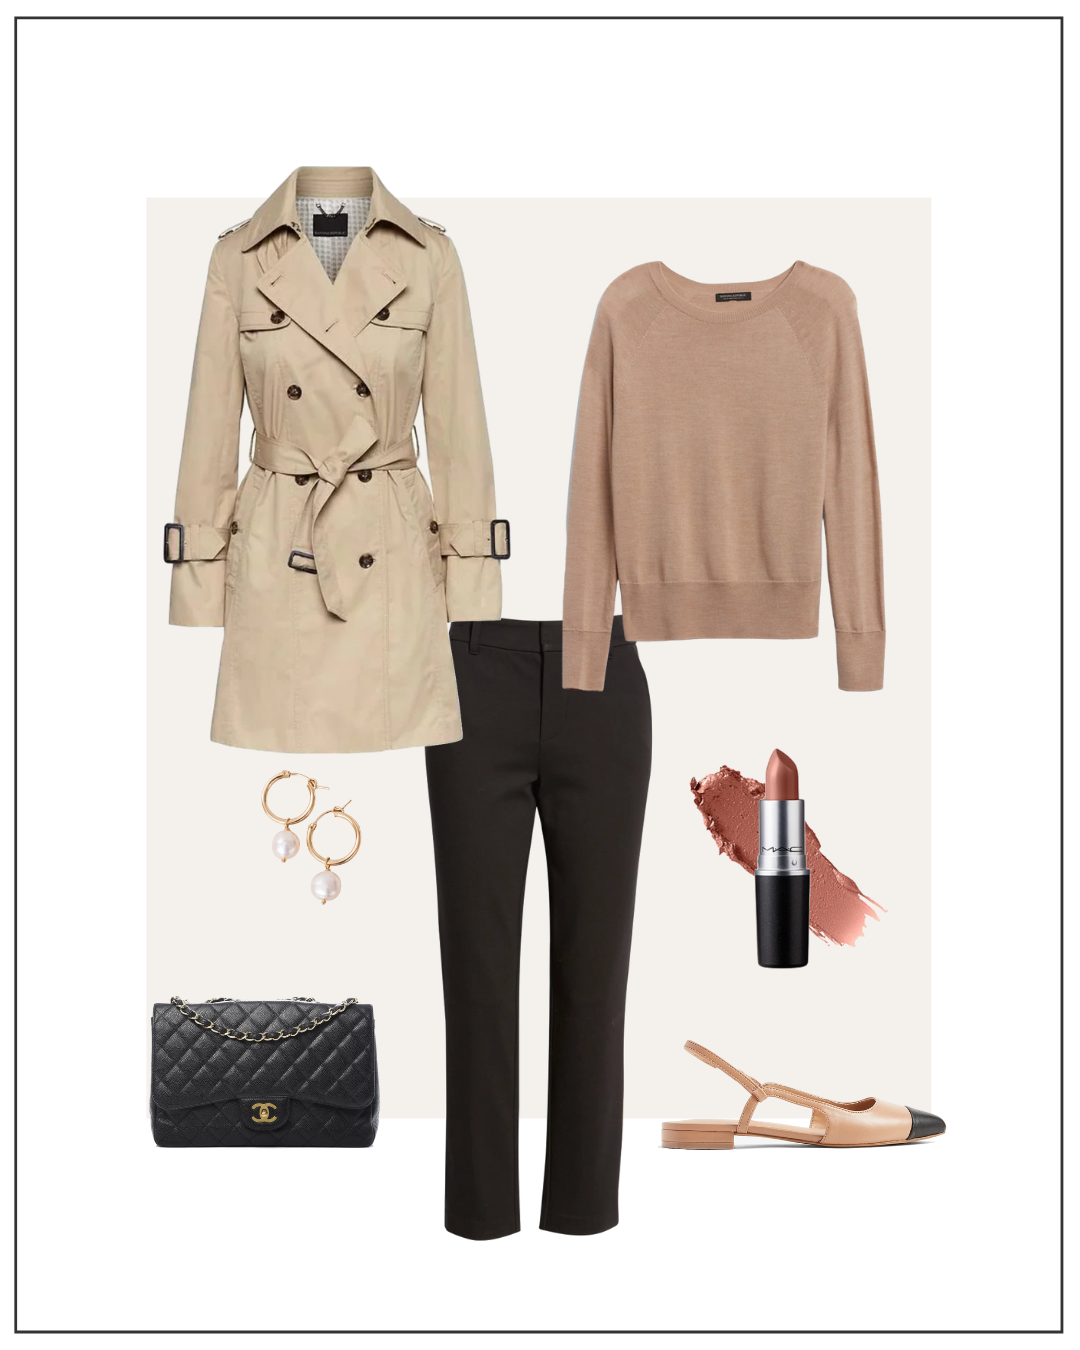 A Week Of Fall Outfits Using Wardrobe Staples - Classy Yet Trendy